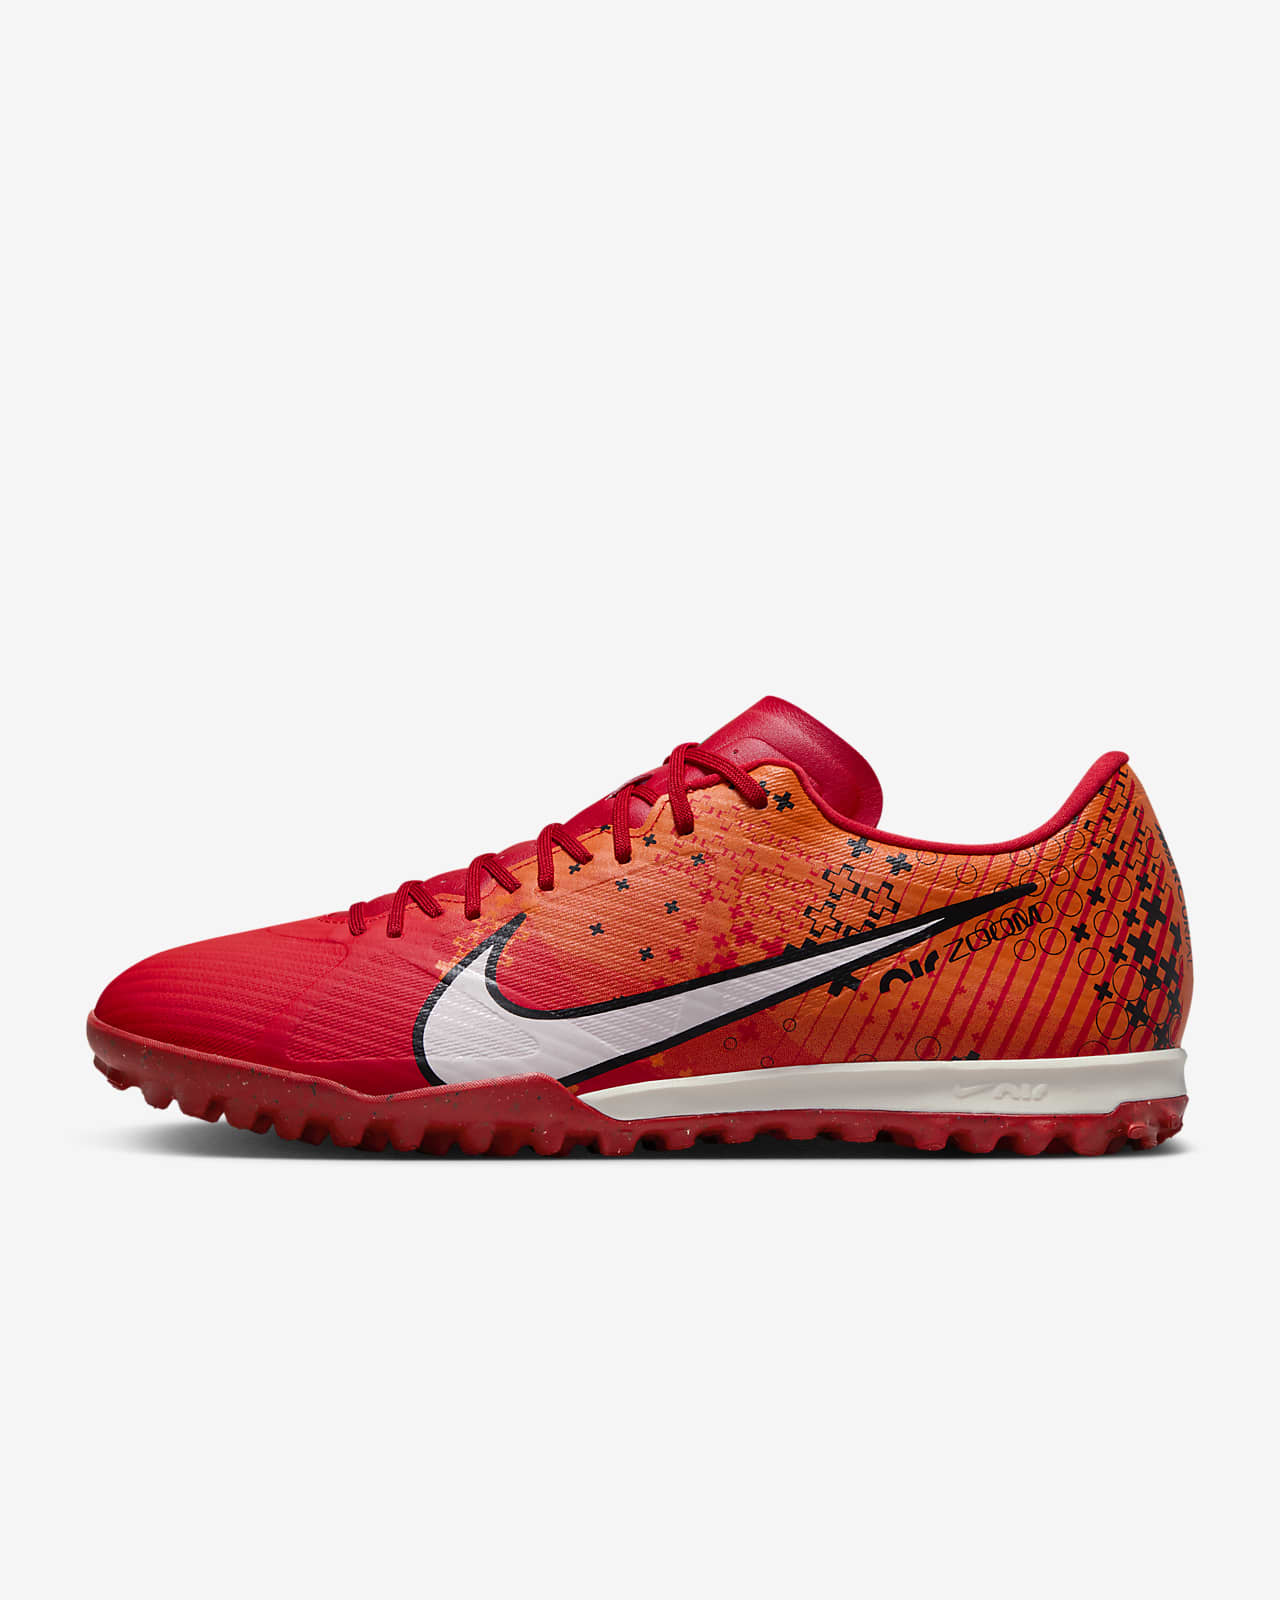 Nike Vapor 15 Academy Mercurial Dream Speed TF Low-Top Football Shoes